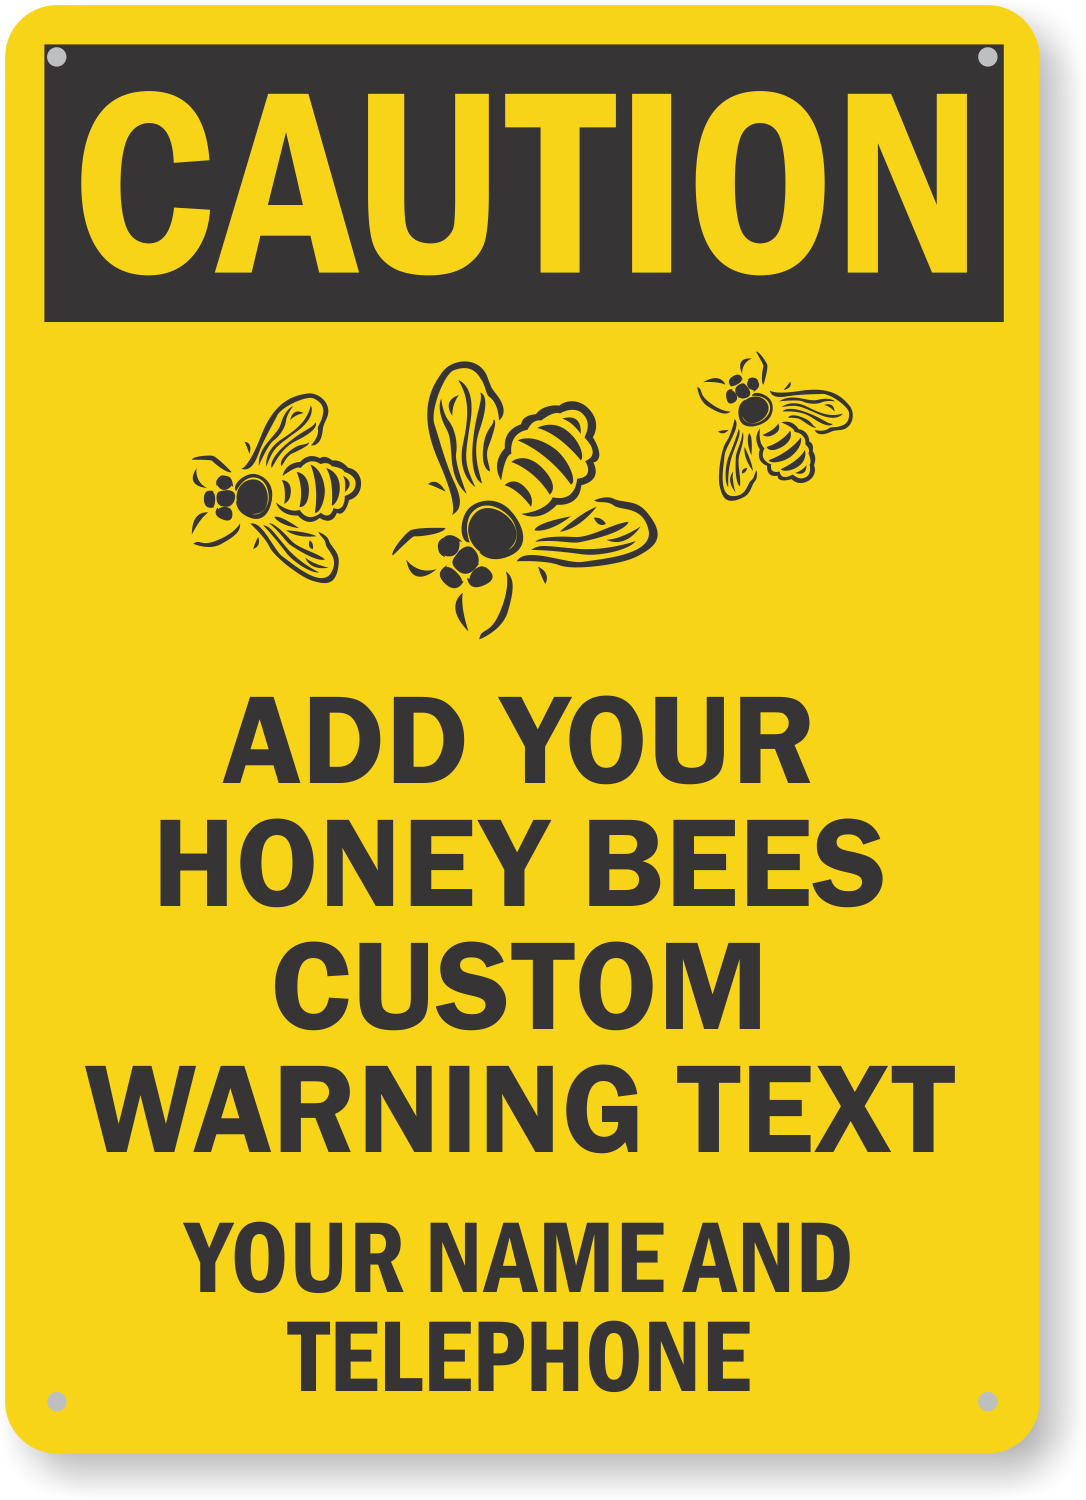 Caution Stay Clear Advisory 8"x12" Aluminum Sign Bees 